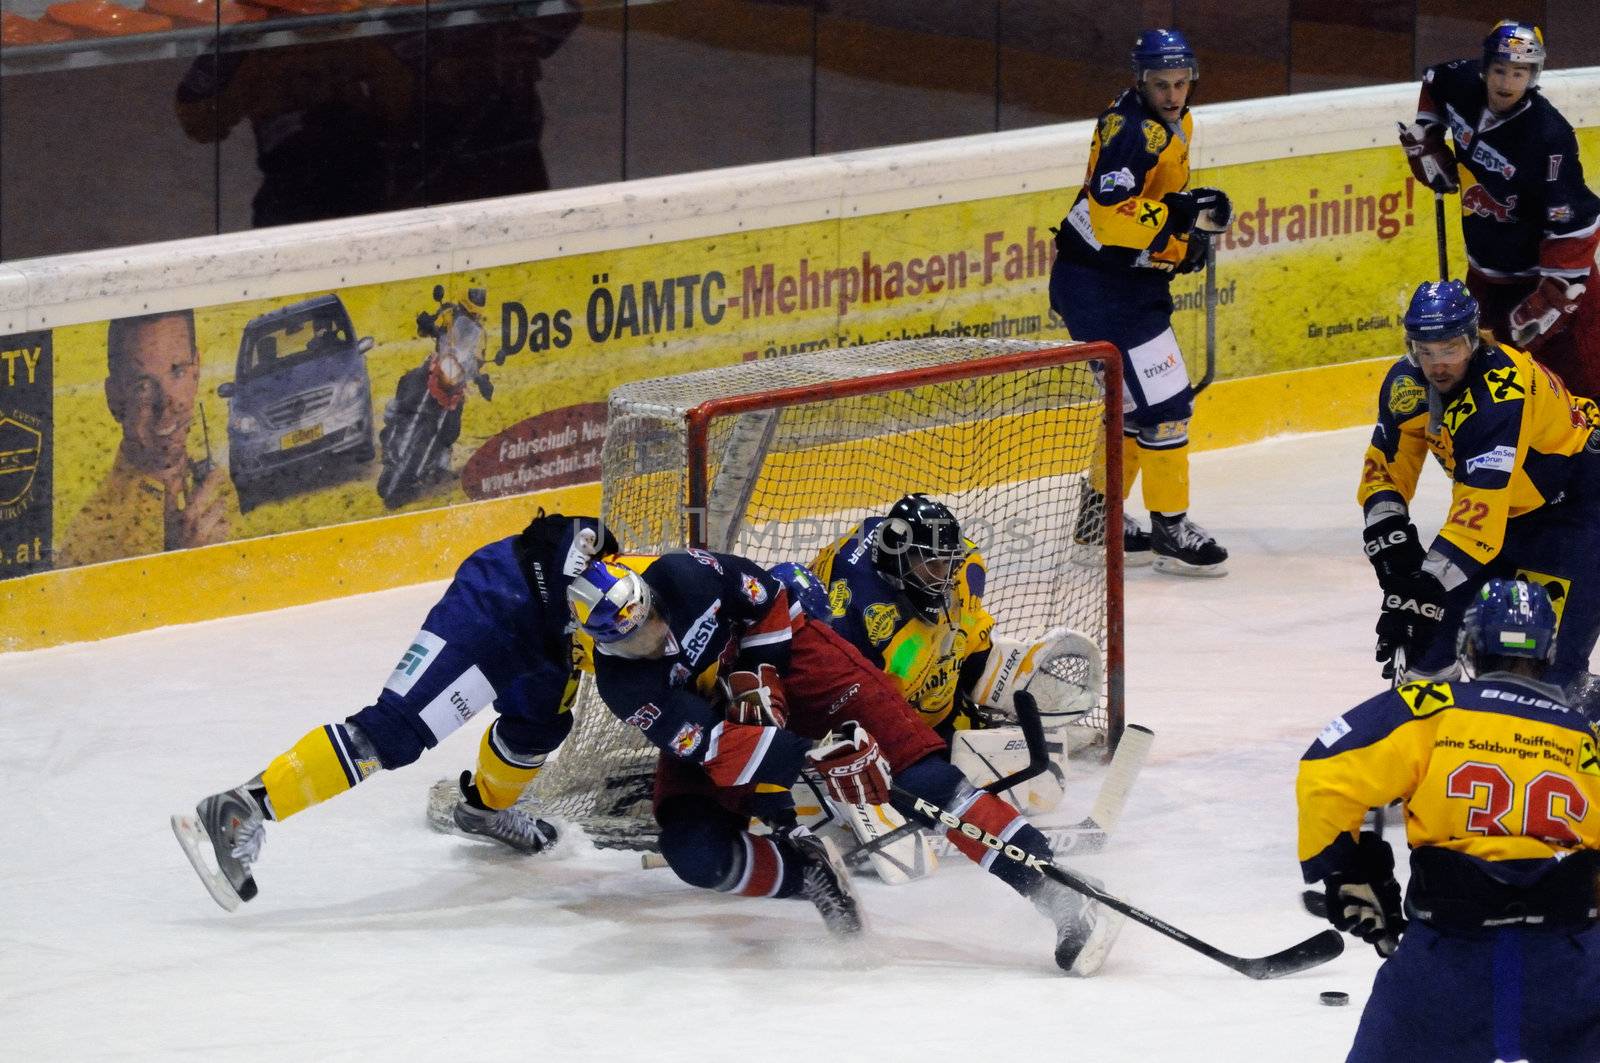 ZELL AM SEE, AUSTRIA - DECEMBER 7: Austrian National League. Action in front of Keeper Bartholomaeus. Game EK Zell am See vs. Red Bulls Salzburg (Result 4-6) on December 7, 2010, at hockey rink of Zell am See